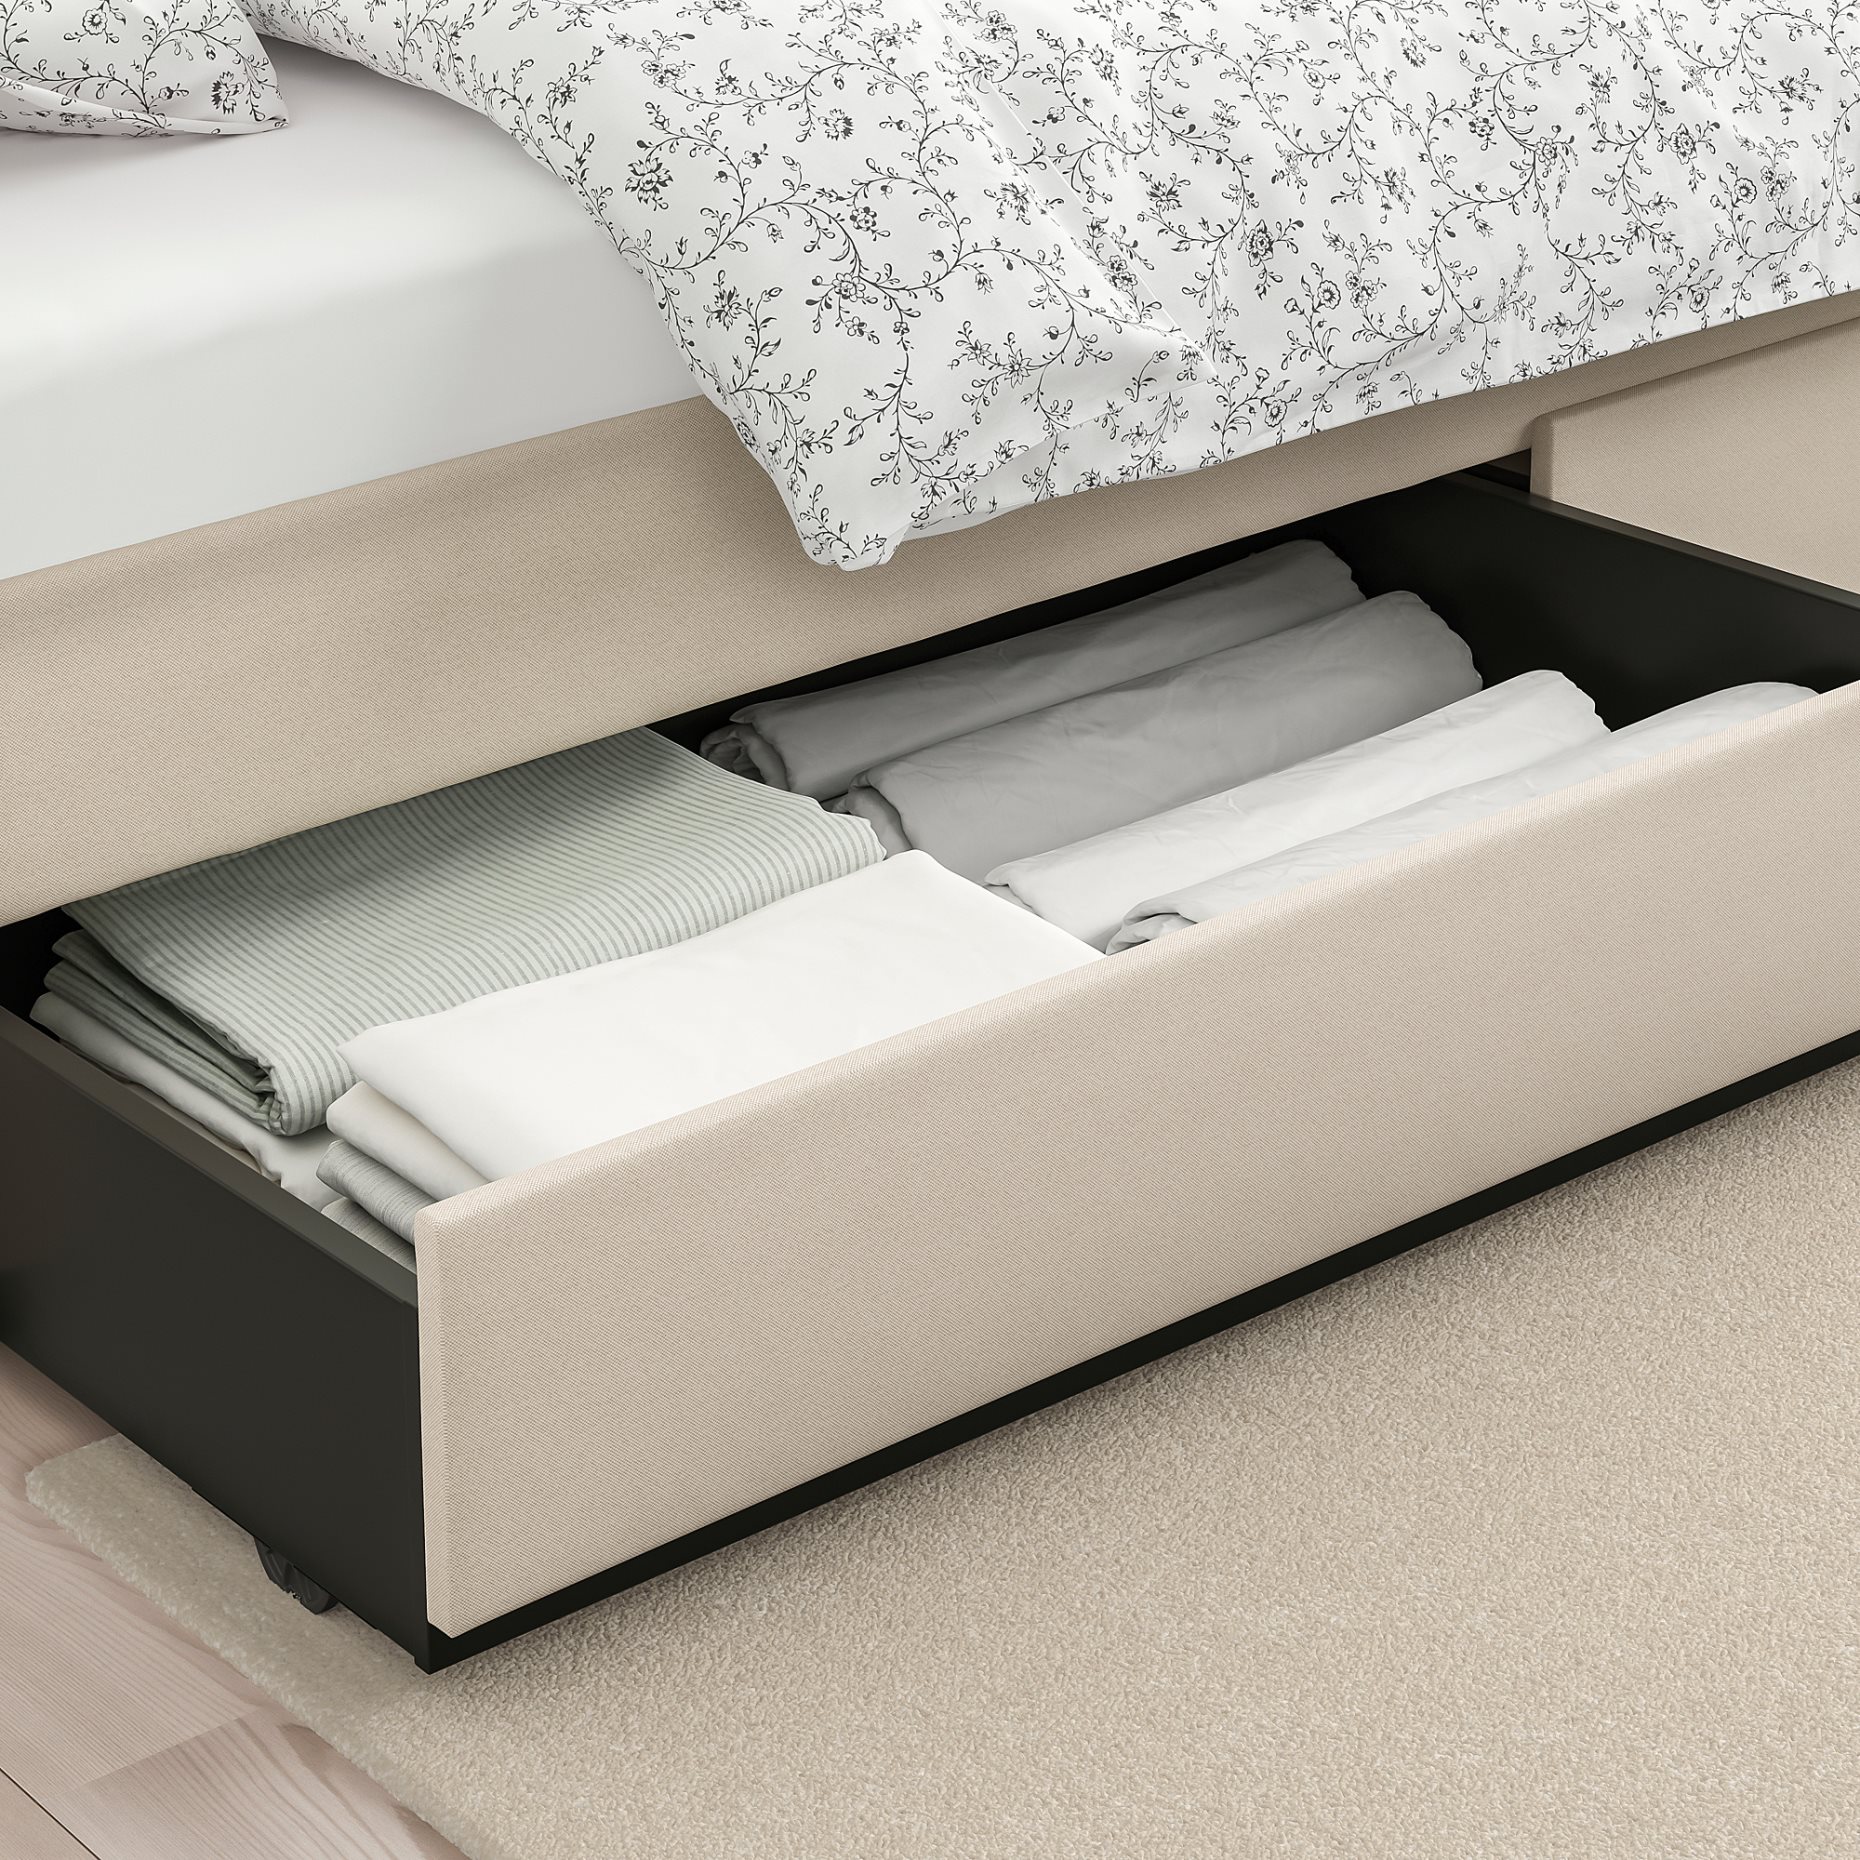 HAUGA, upholstered bed/ 2 storage boxes, 160X200 cm, 093.366.49